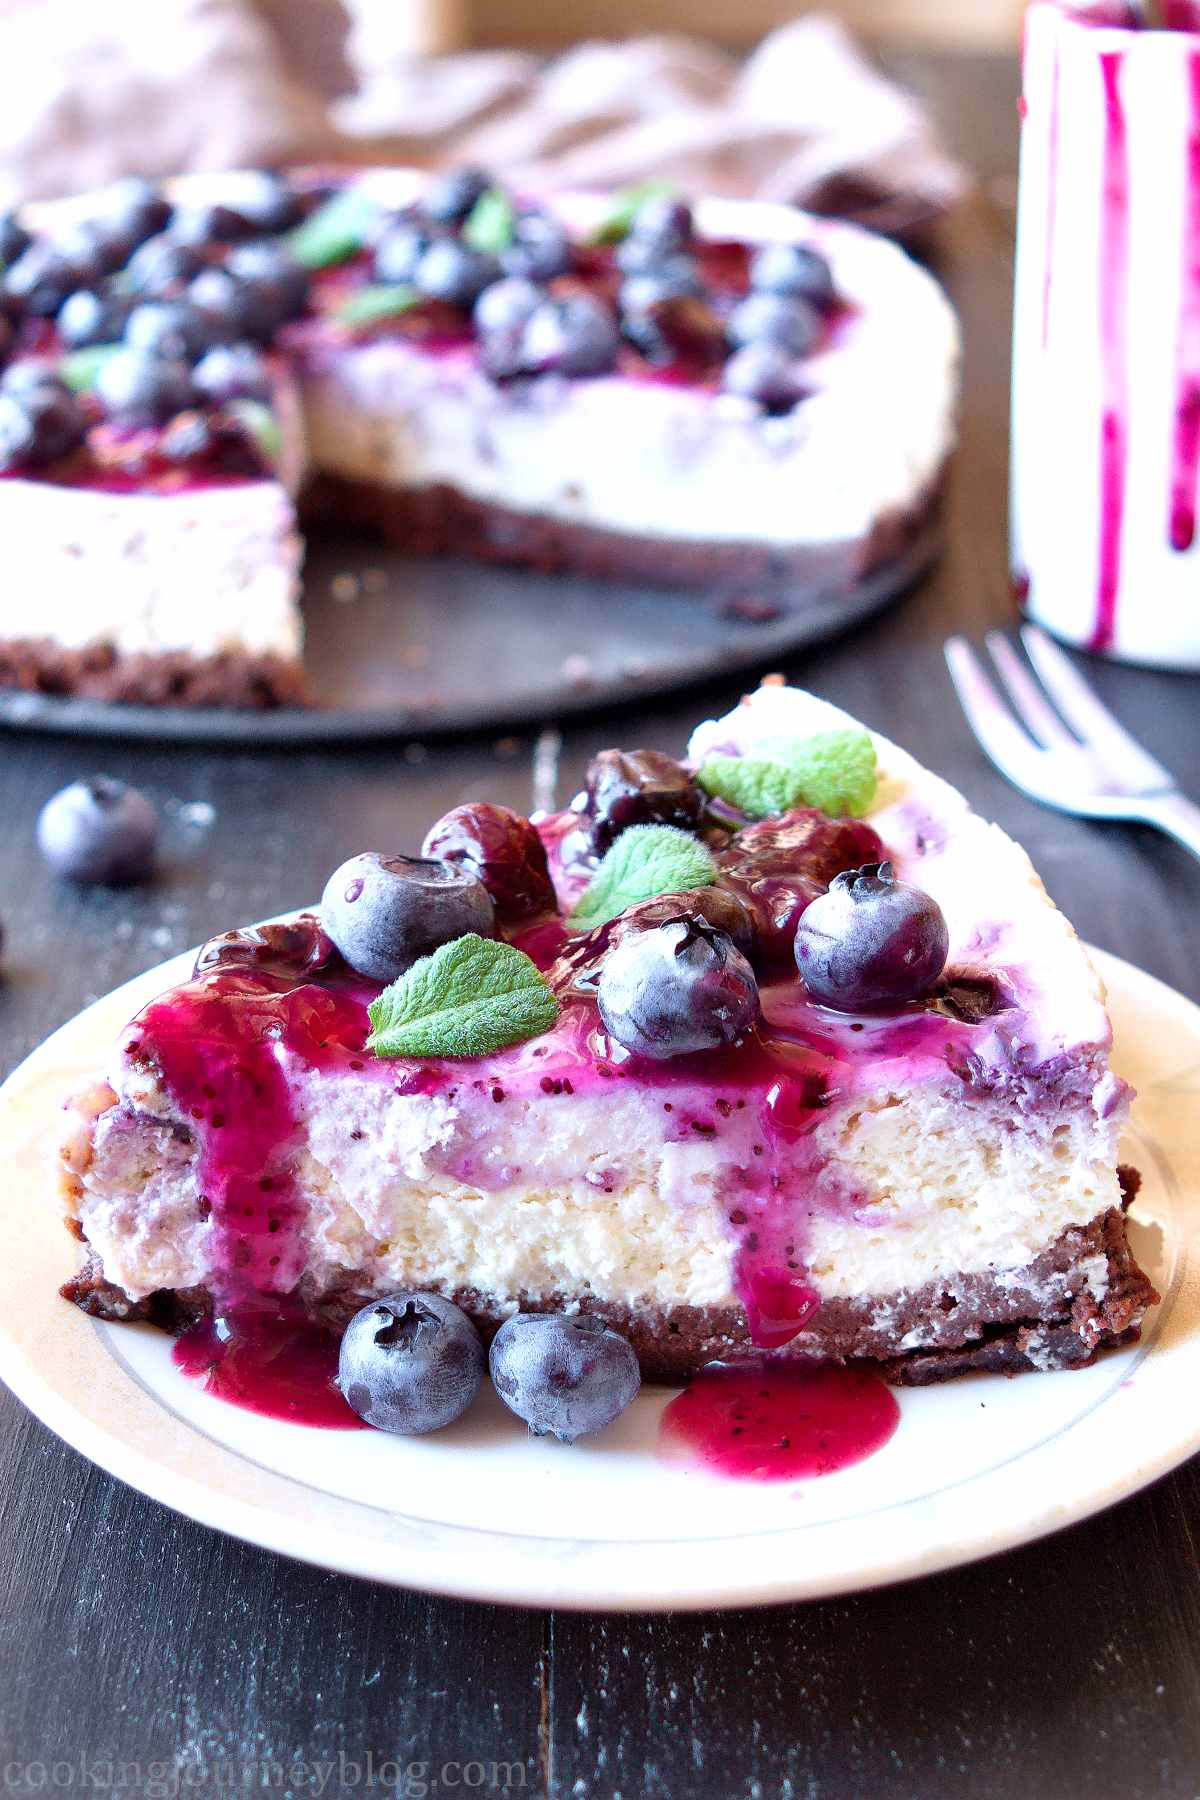 Blueberry cheesecake with chocolate biscuit crust and fresh blueberries and mint on top